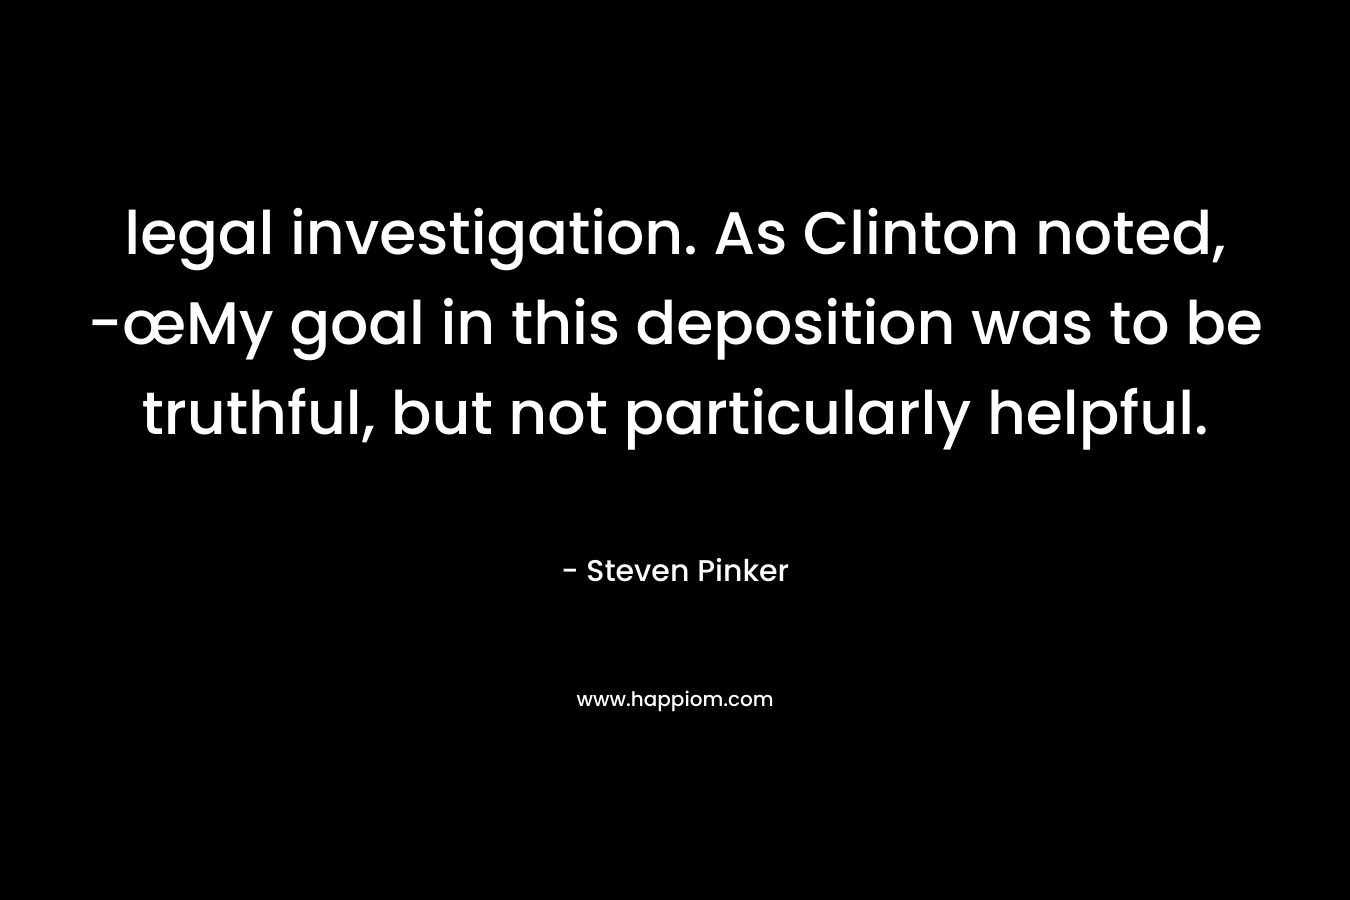 legal investigation. As Clinton noted, -œMy goal in this deposition was to be truthful, but not particularly helpful. – Steven Pinker